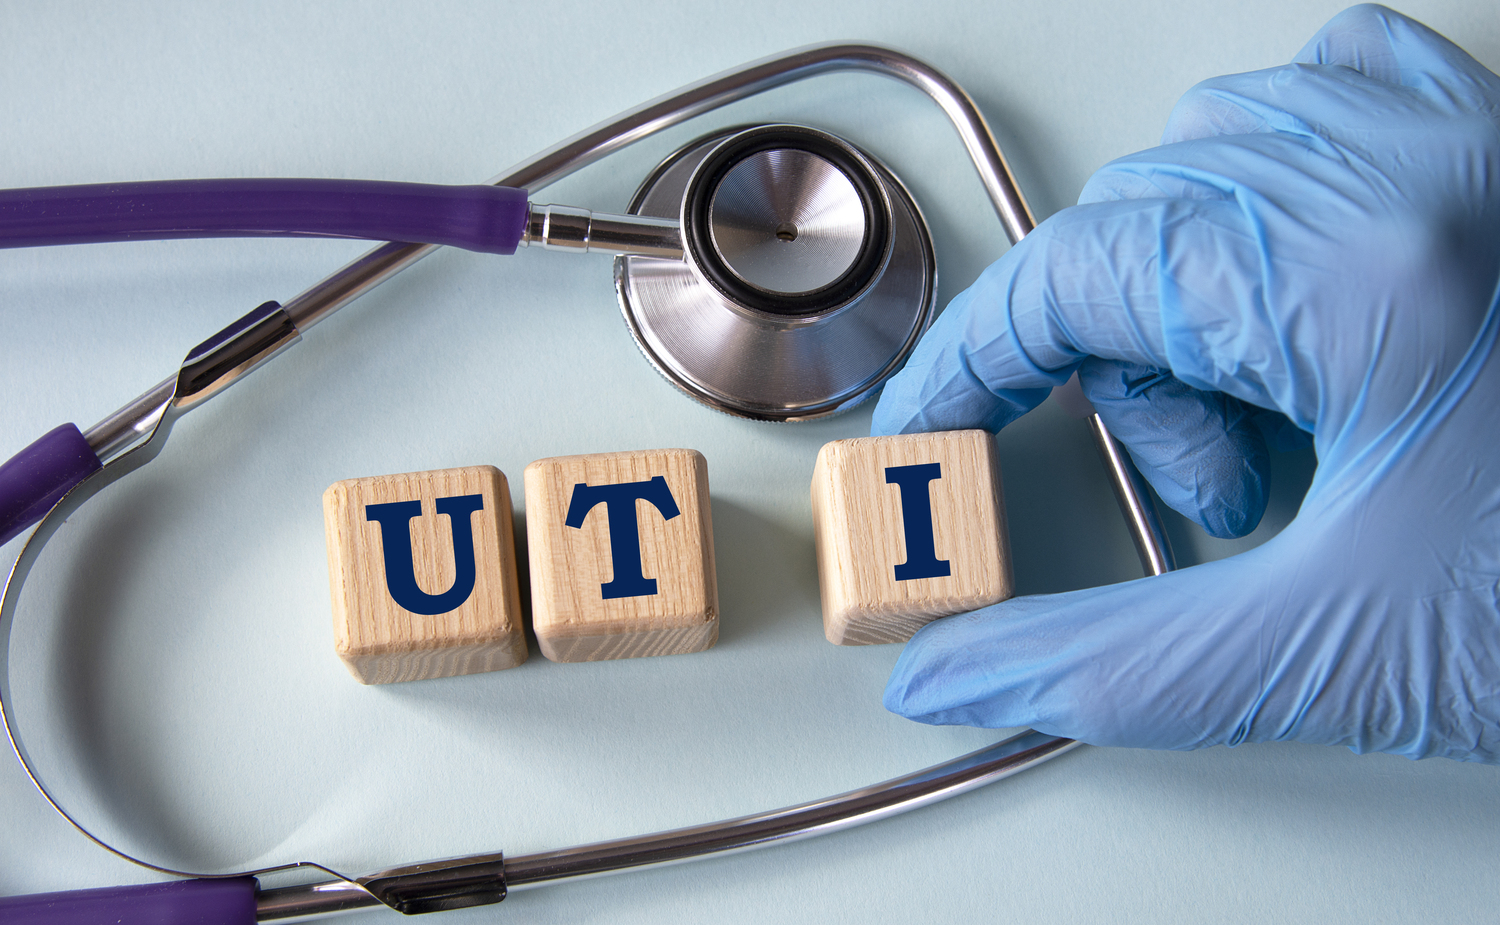 Picture of a person in a medical glove arranging wooden blocks spelling out "UTI" next to a stethoscope.